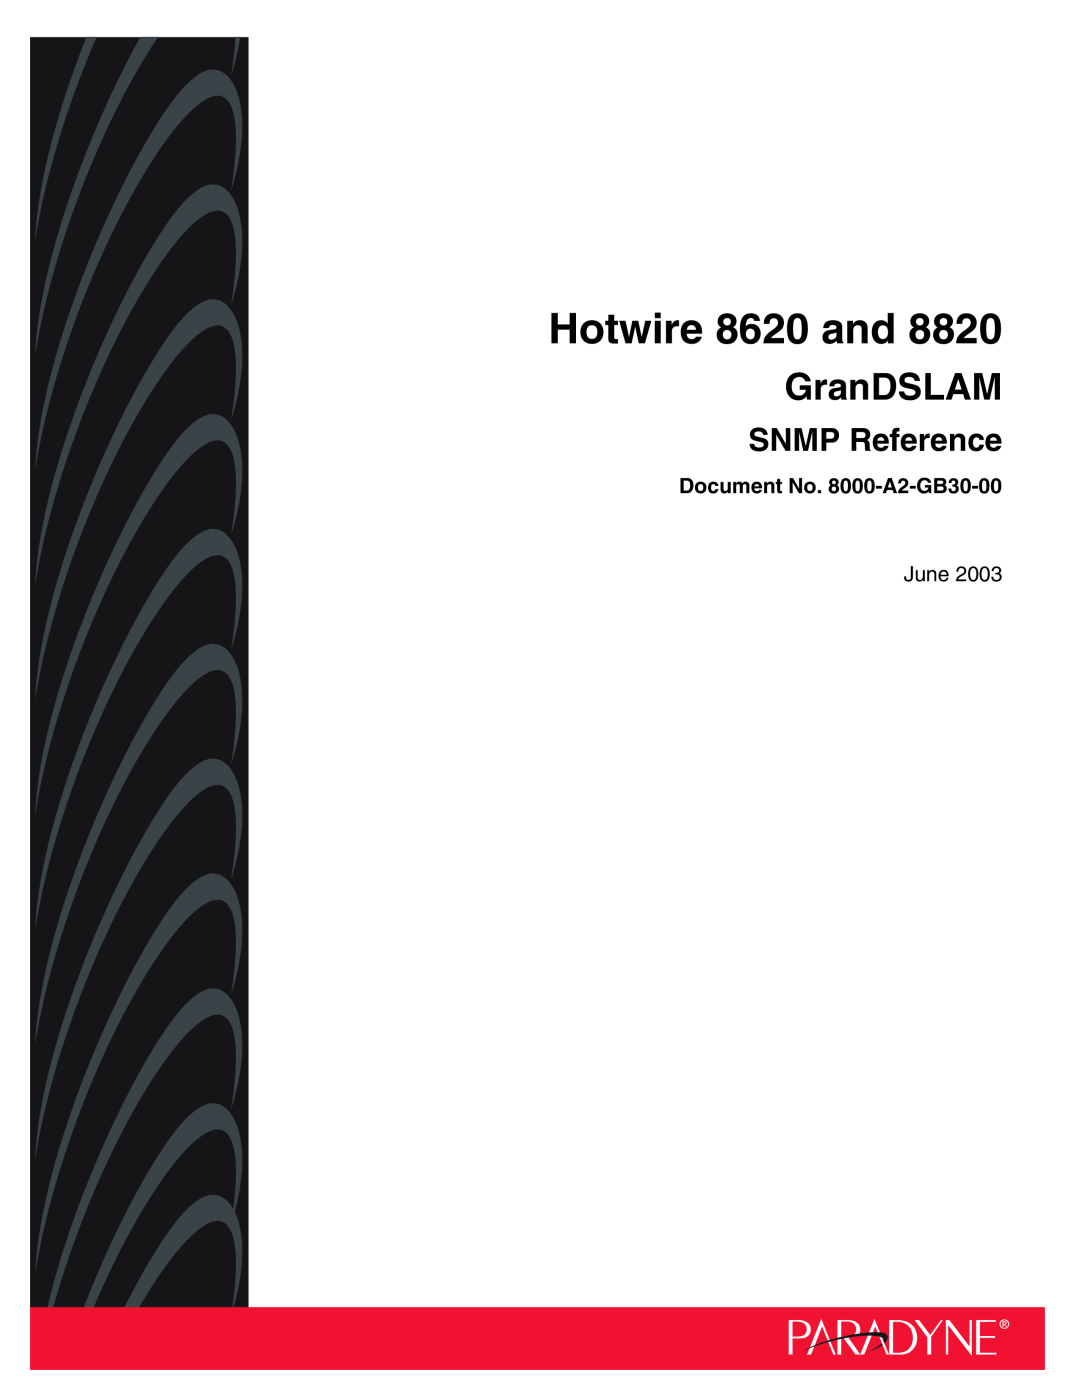 Paradyne Hotwire 8620 GranDSLAM Installation Guide manual Document No. 8620-A2-GN20-40, July 